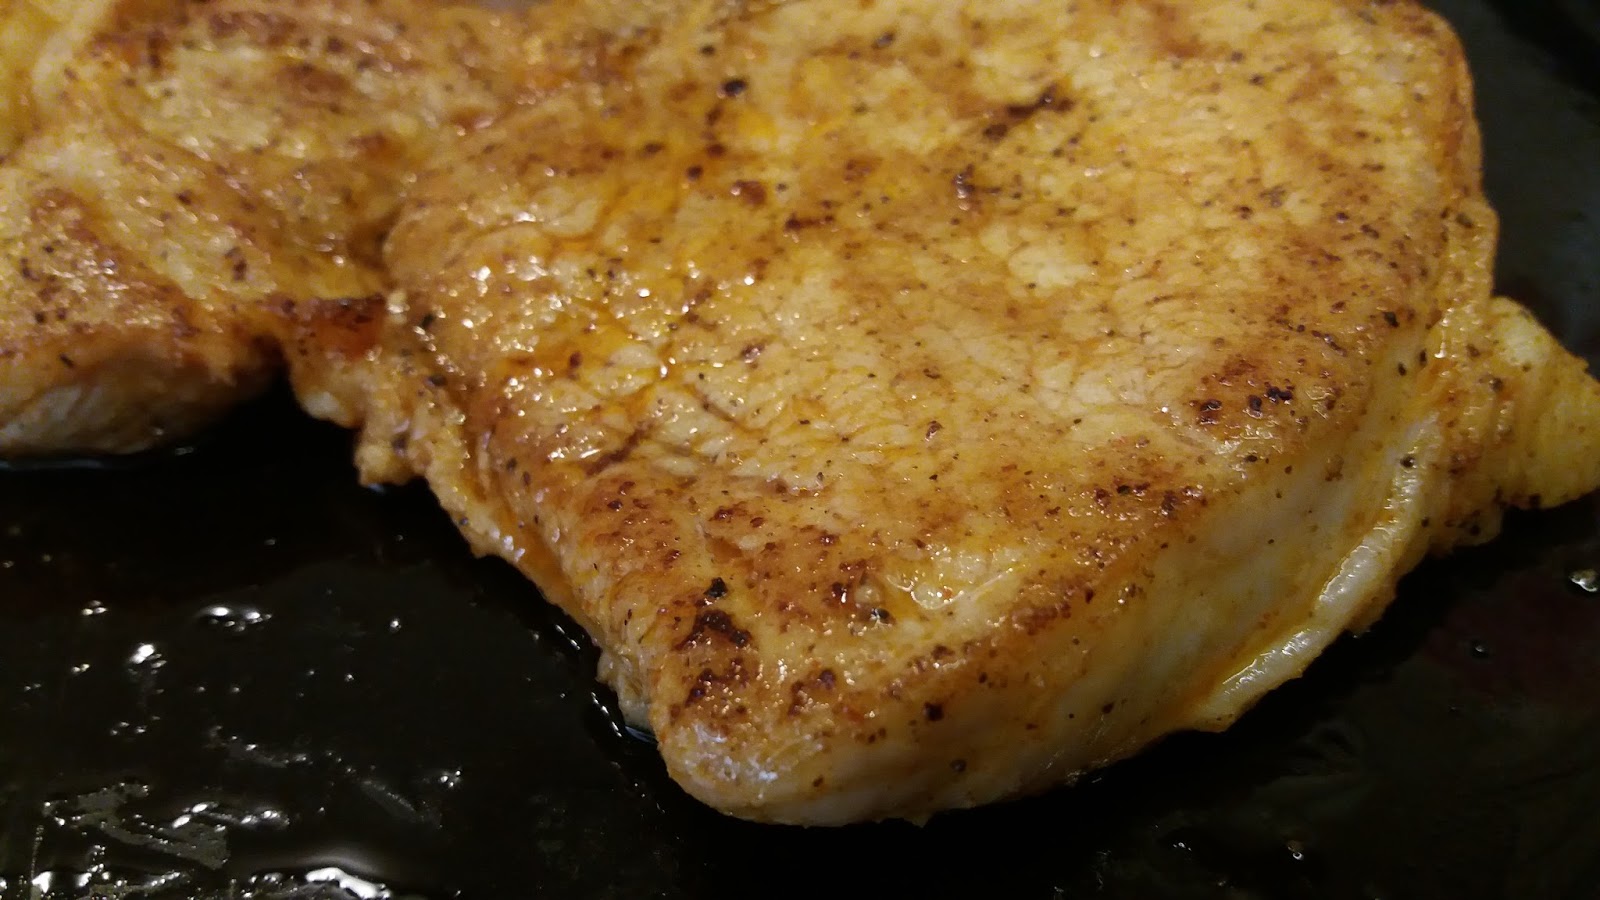 PORK CHOPS IN AN OVEN